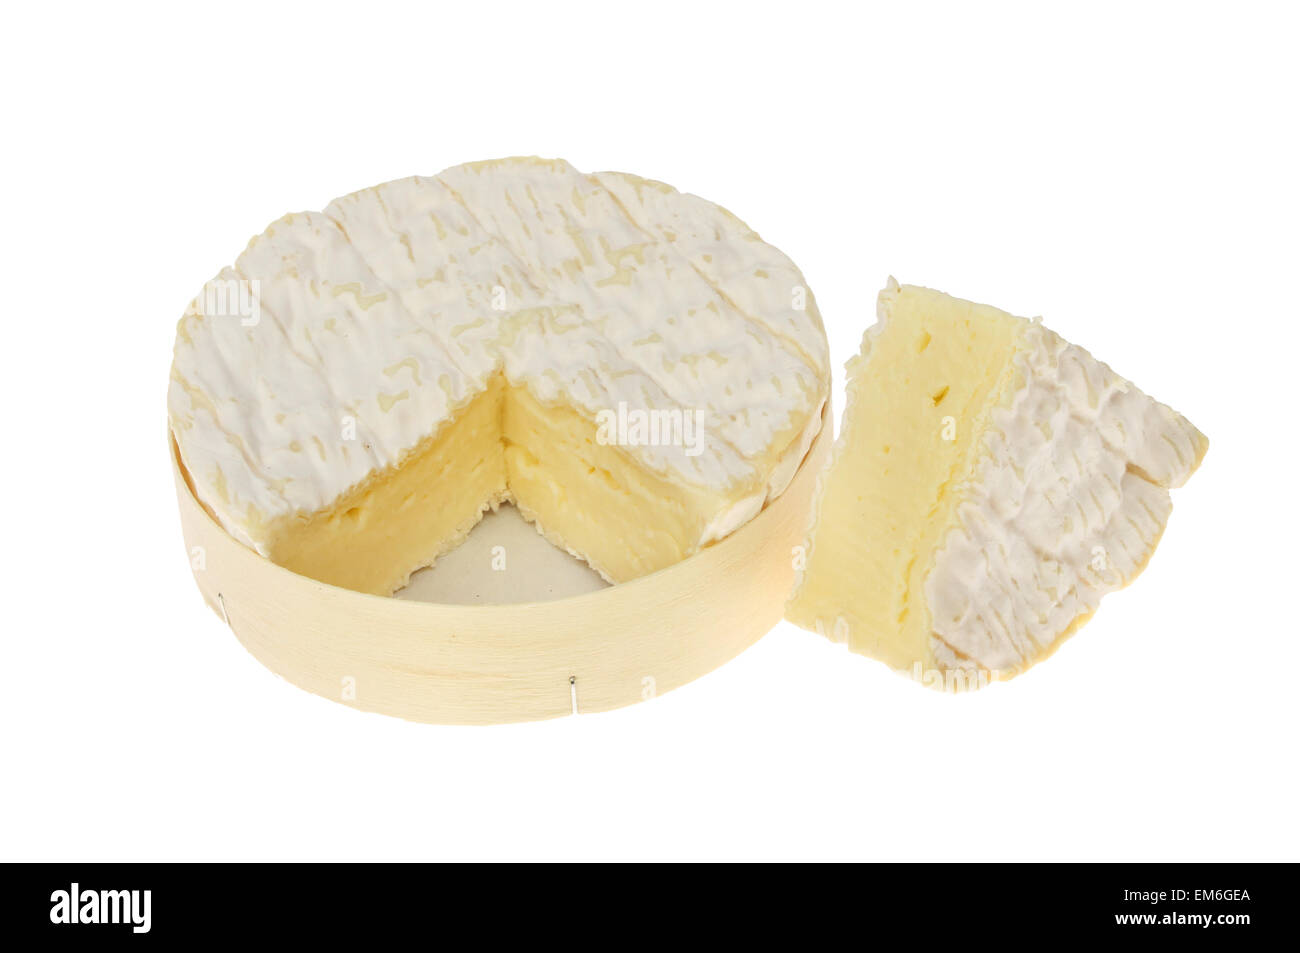 Camembert cheese in a round box with a wedge cut out isolated against white Stock Photo